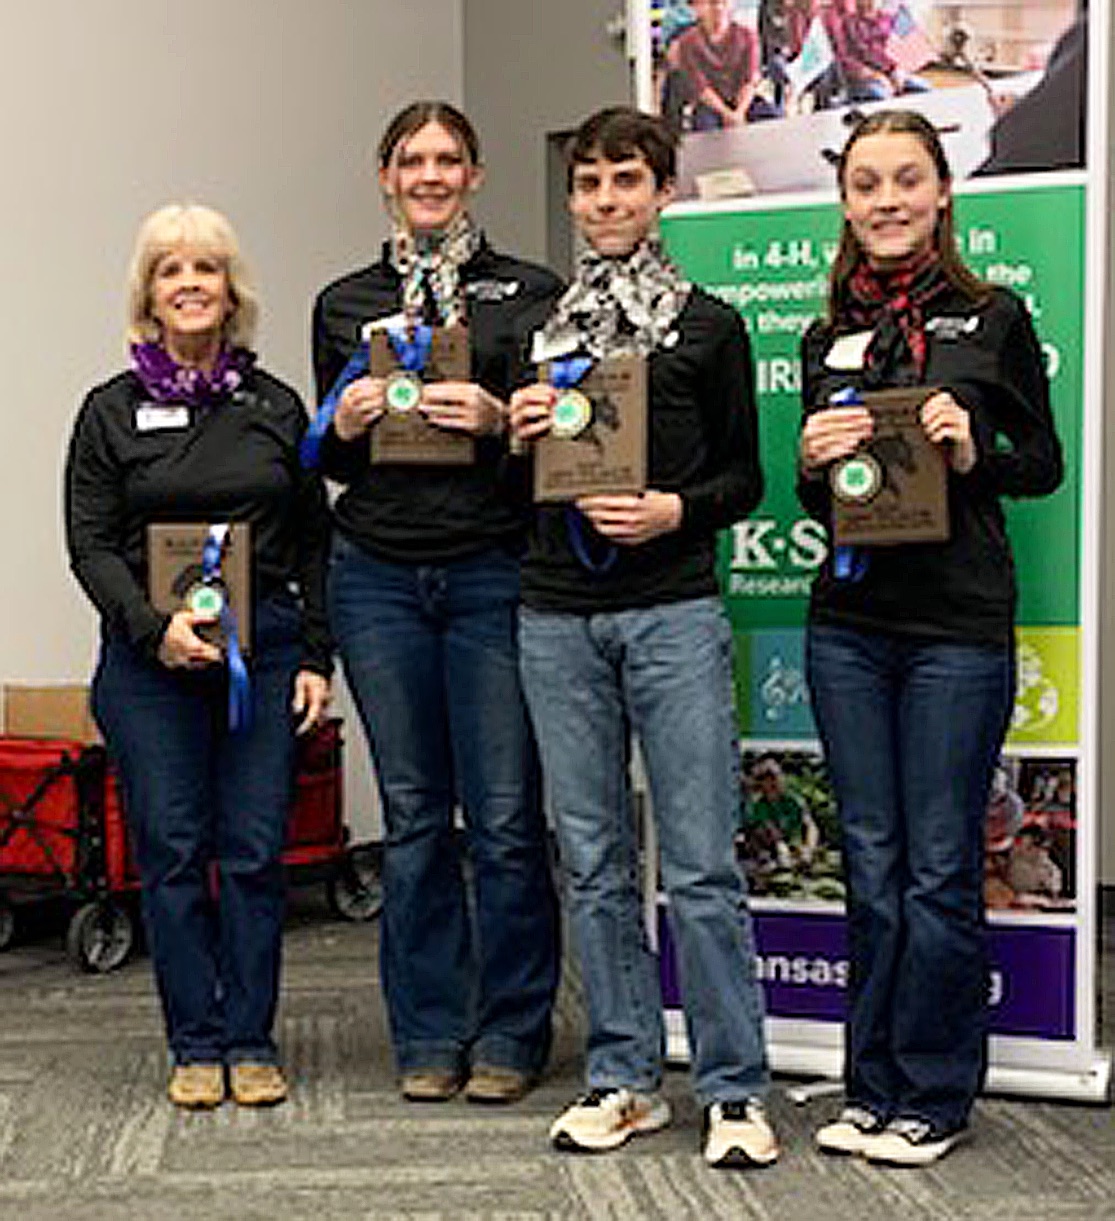 The 4-H Senior Team pictured from the left are Judy Parsons, Channing Dillinger, Cody Gerrond and Lainey Cox. They are the Senior Horse Quiz Bowl Champions at the State 4-H Horse Panorama. Photo courtesy of Judy Parsons.